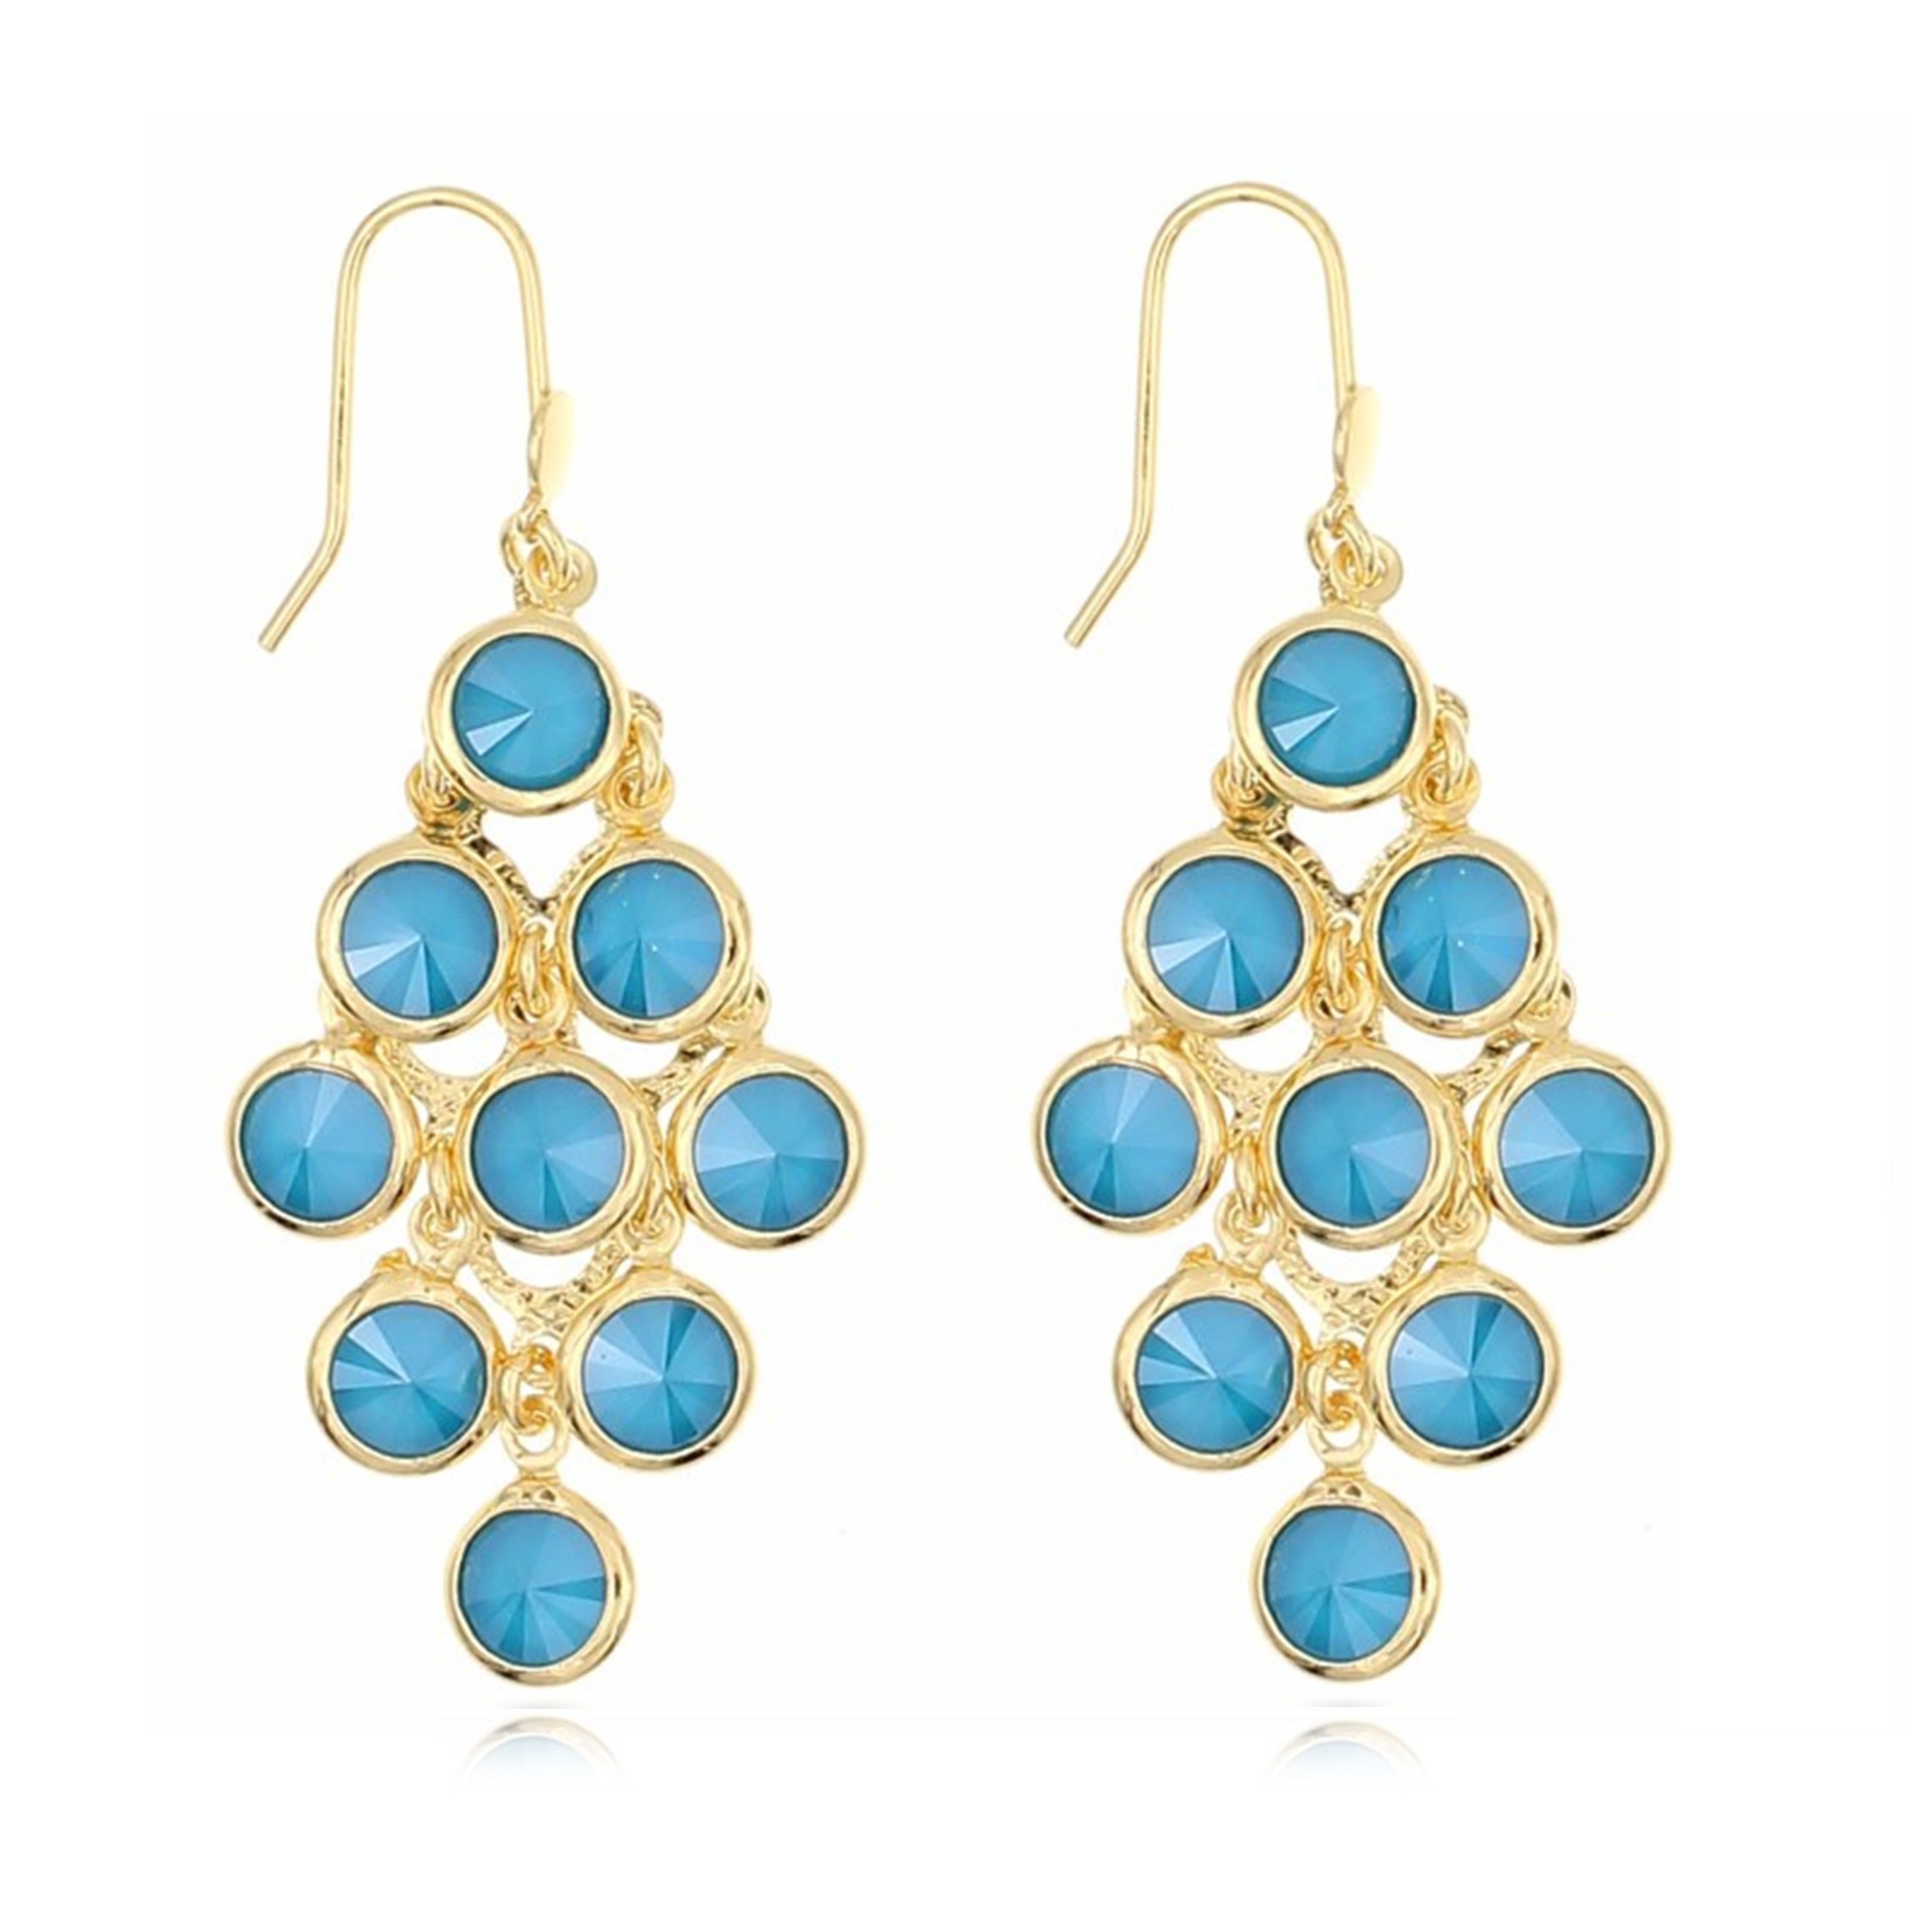 Sterling Silver Gold Azure Blue Earrings by Davvero with Crystals from Swarovski®